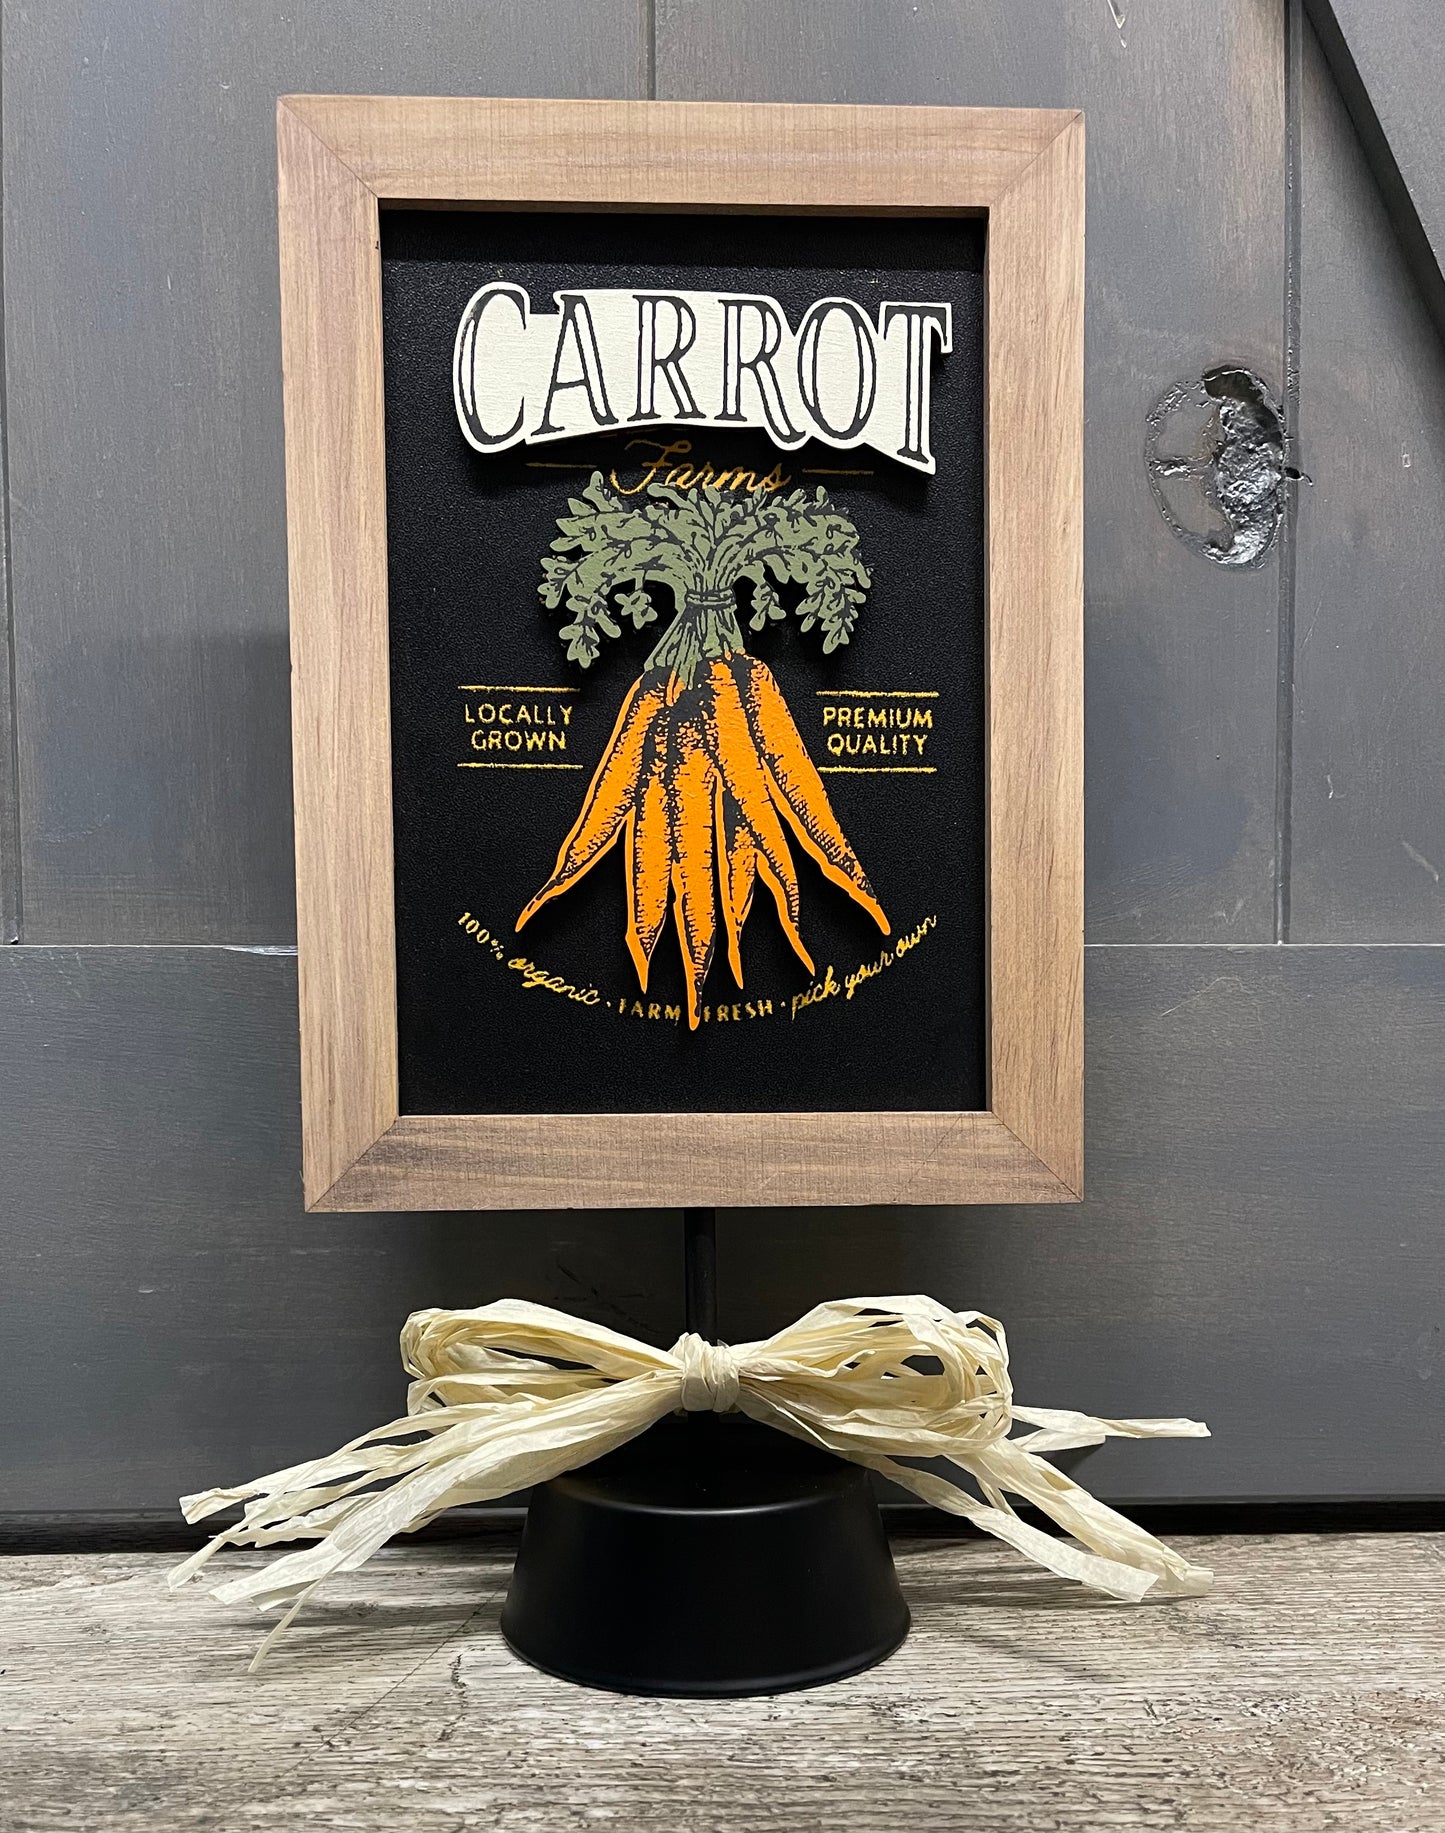 Carrot word and Carrot unpainted wood cutouts - ready for you to paint